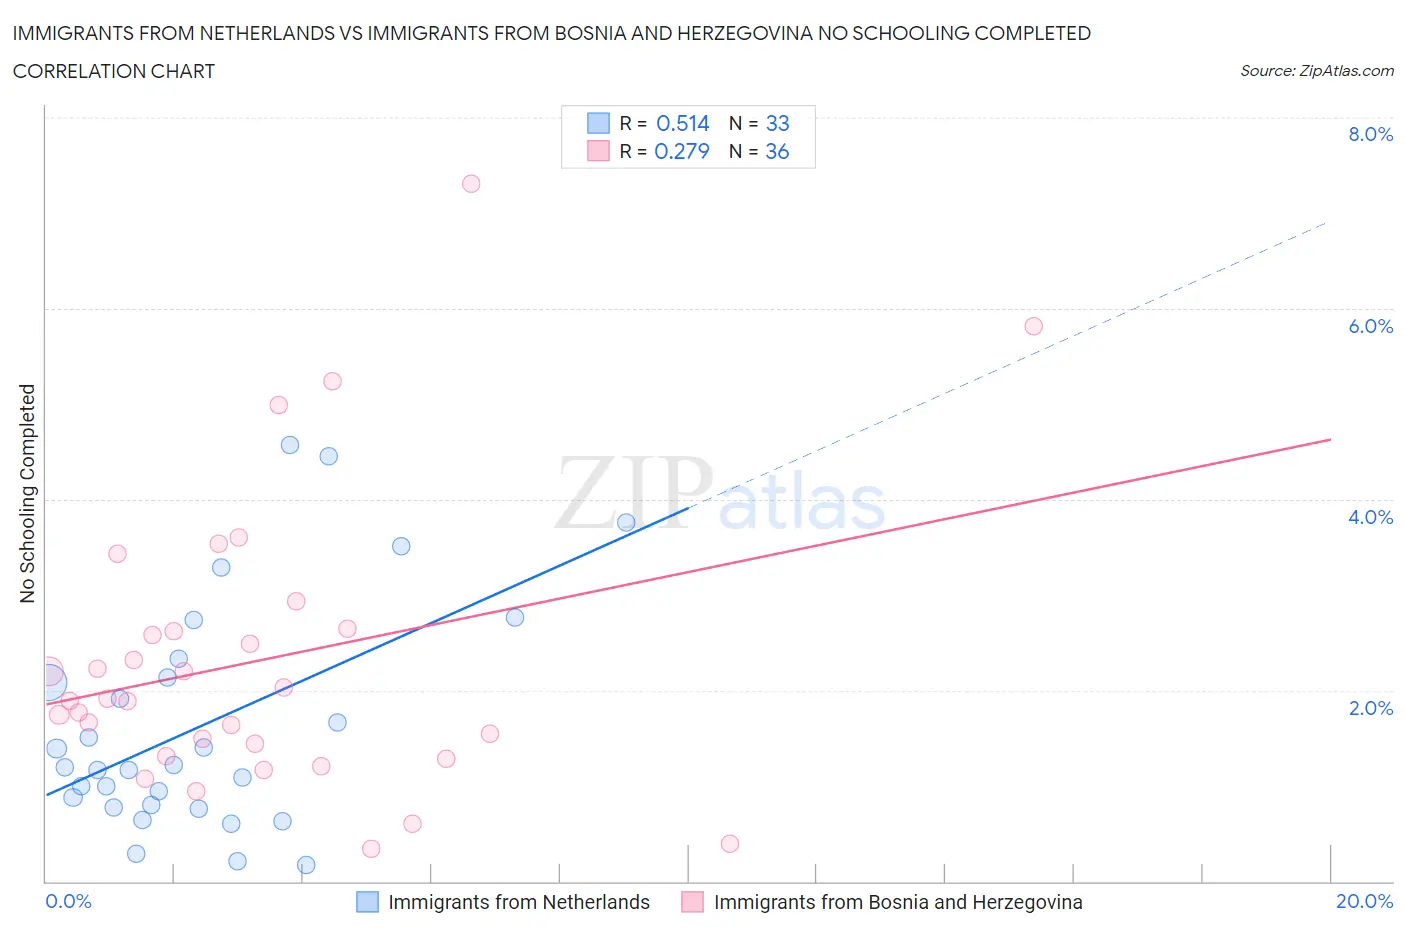 Immigrants from Netherlands vs Immigrants from Bosnia and Herzegovina No Schooling Completed